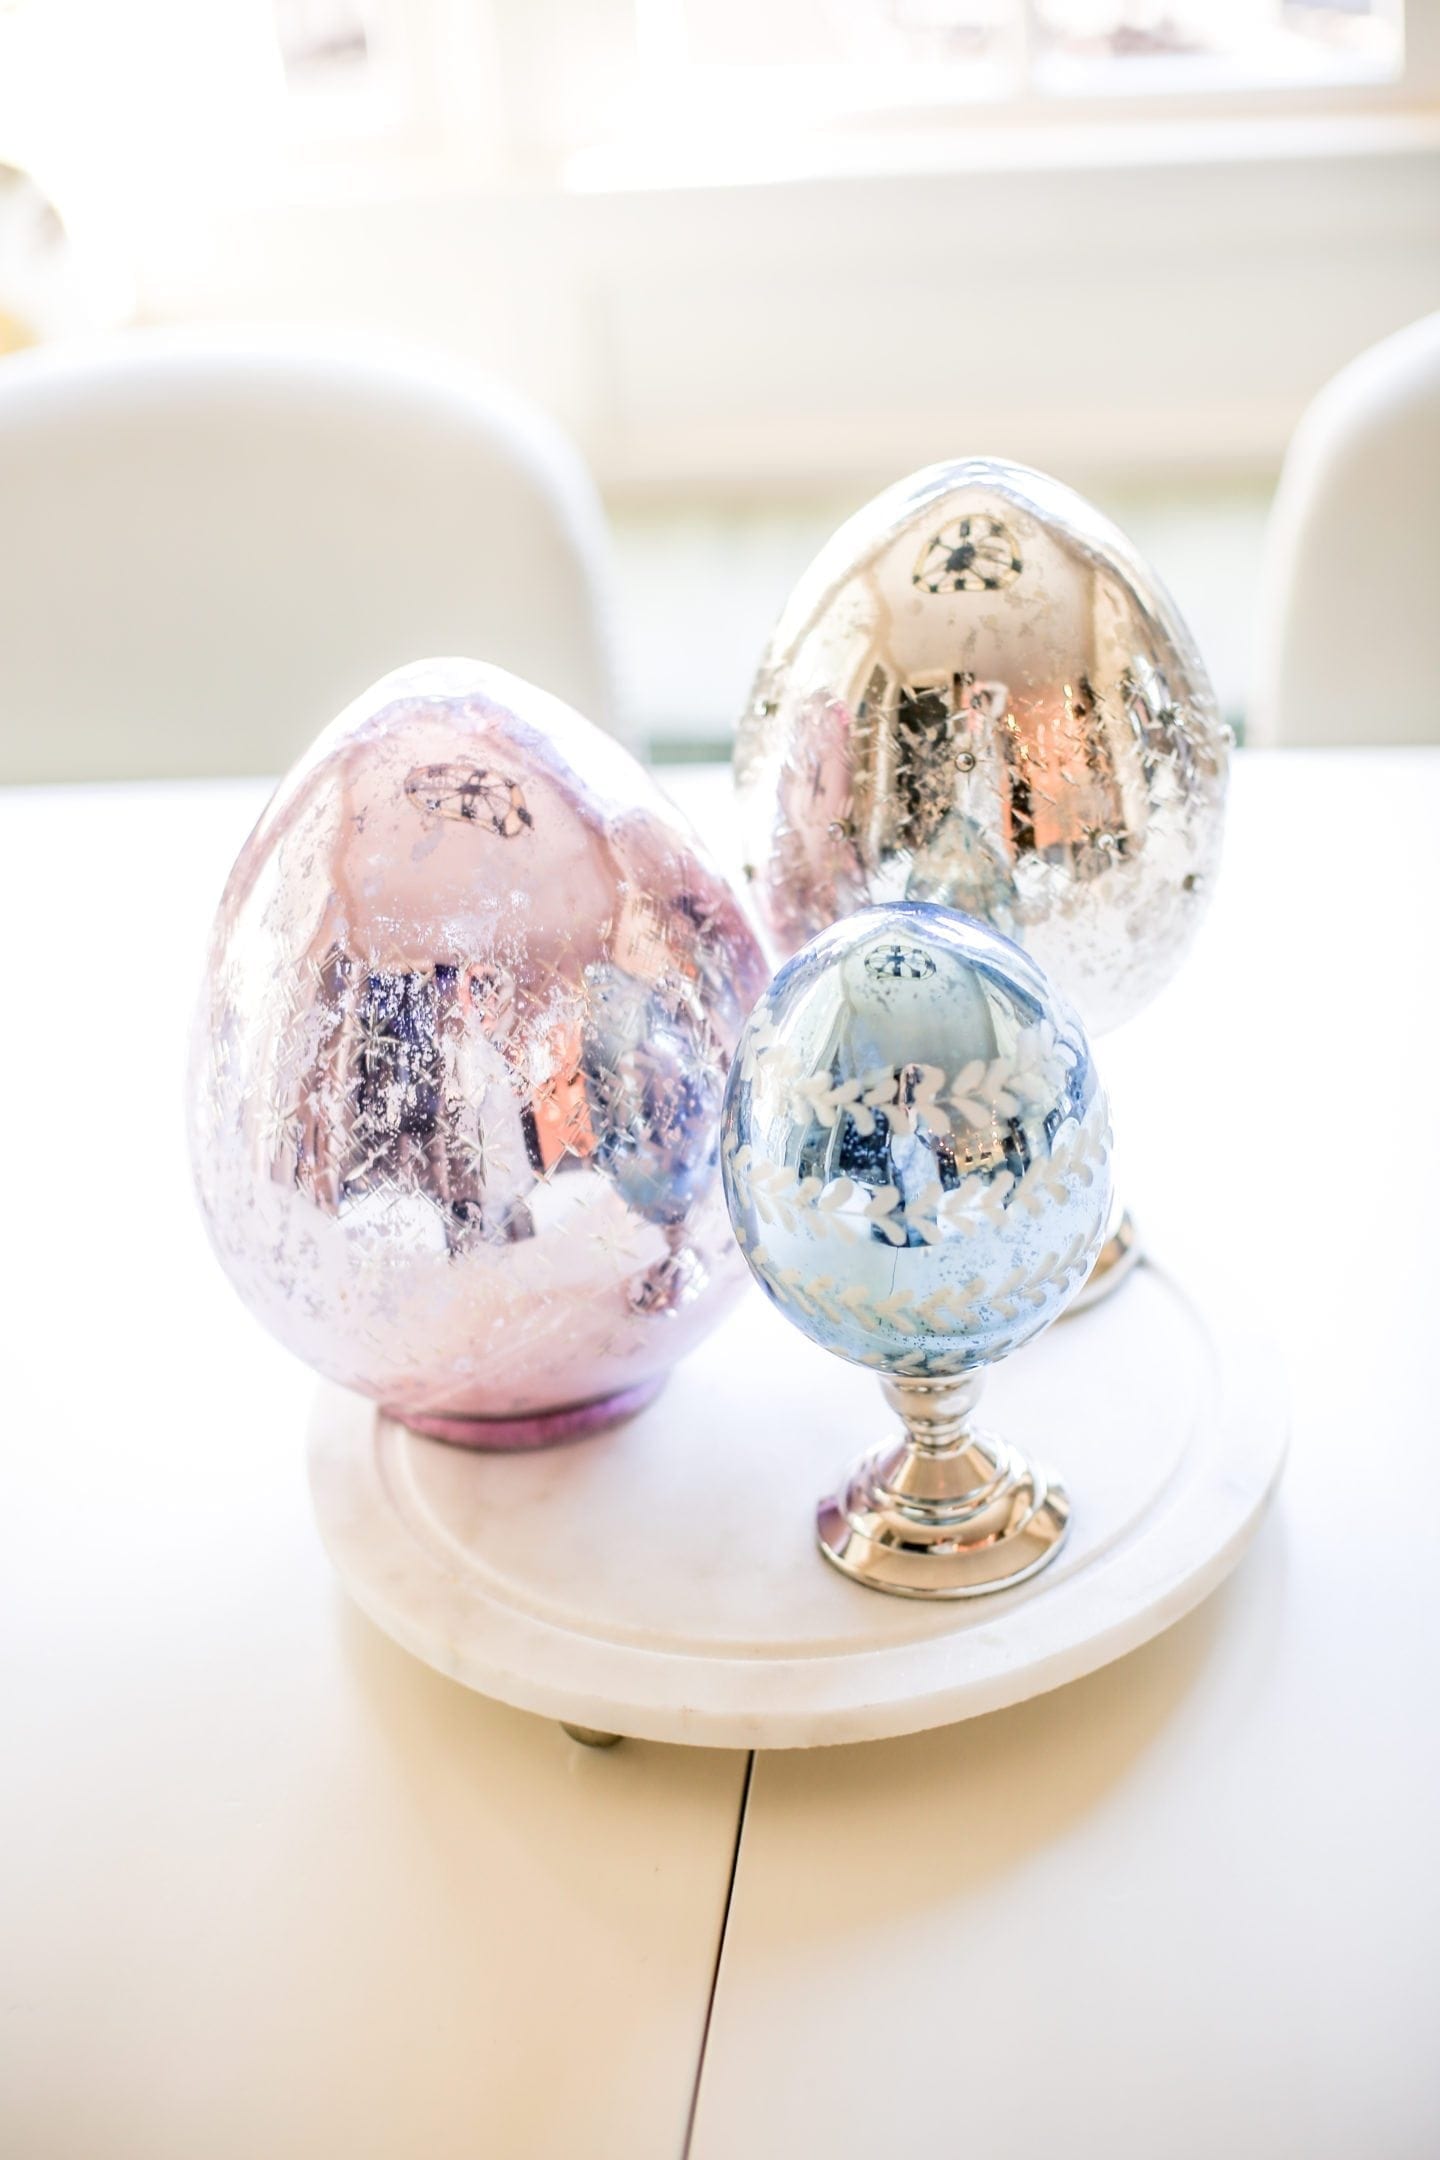 Mercury Glass Eggs on Pedestals. Easter egg decorations.